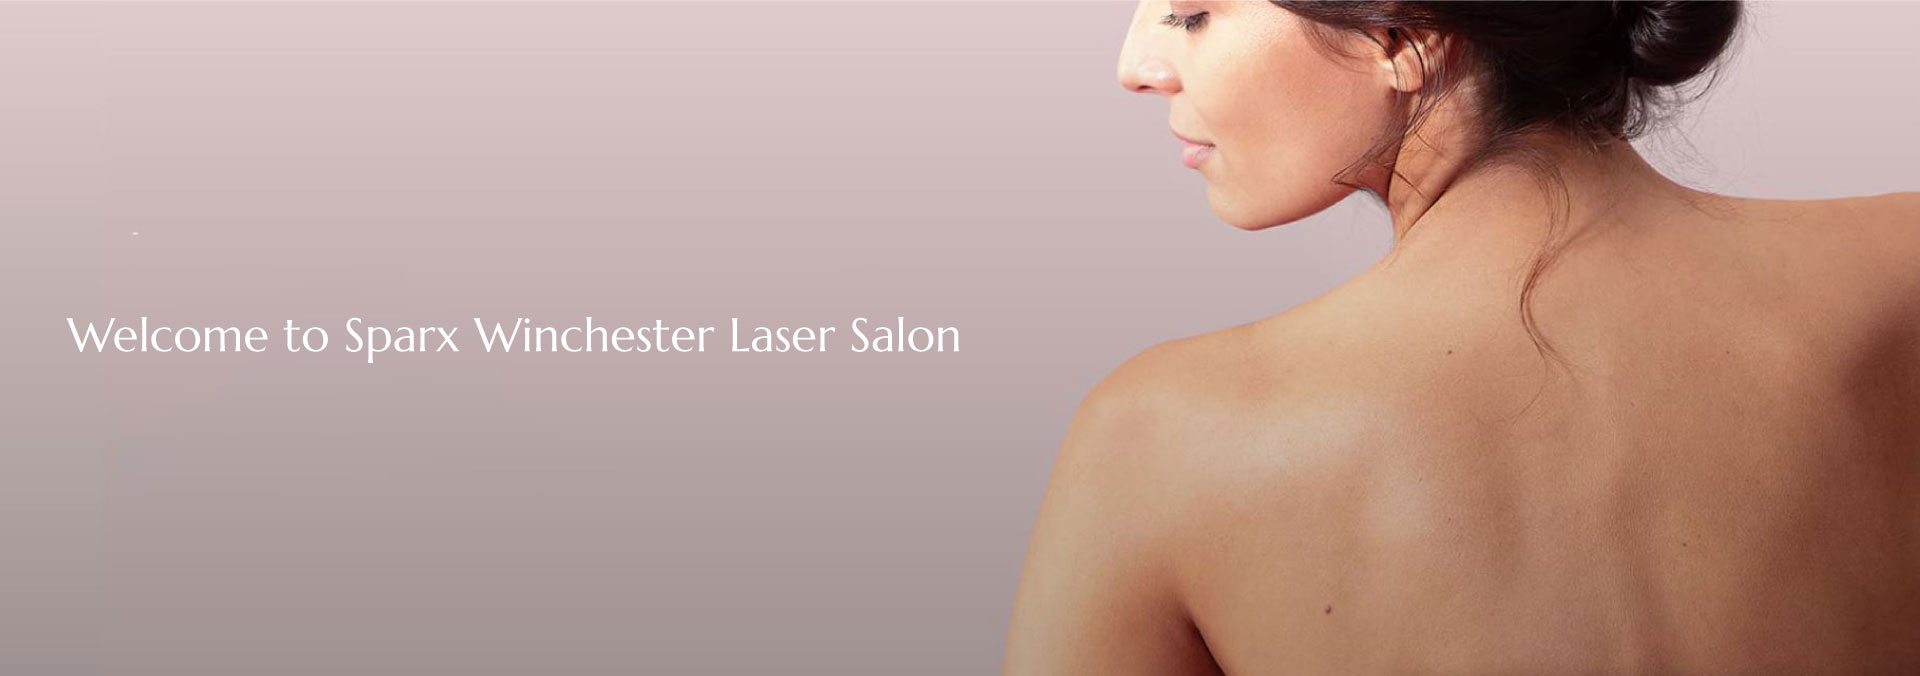 Welcome to Sparx Winchester Laser Salon